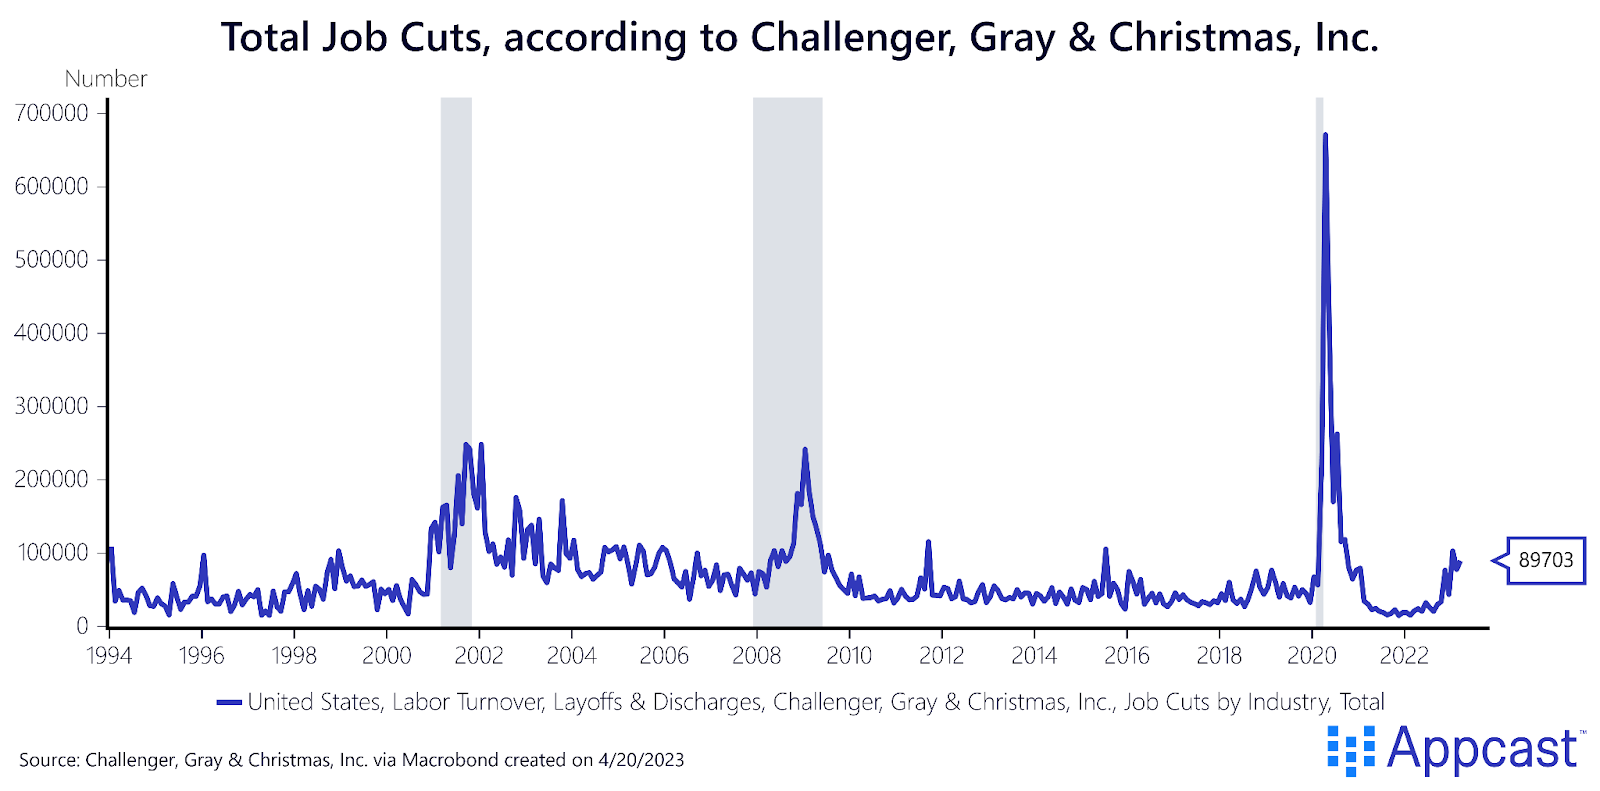 Total announced job cuts across the U.S. from 1994 to 2023, according to Challenger, Gray & Christmas, Inc. Created on April 20, 2023 for Appcast. 